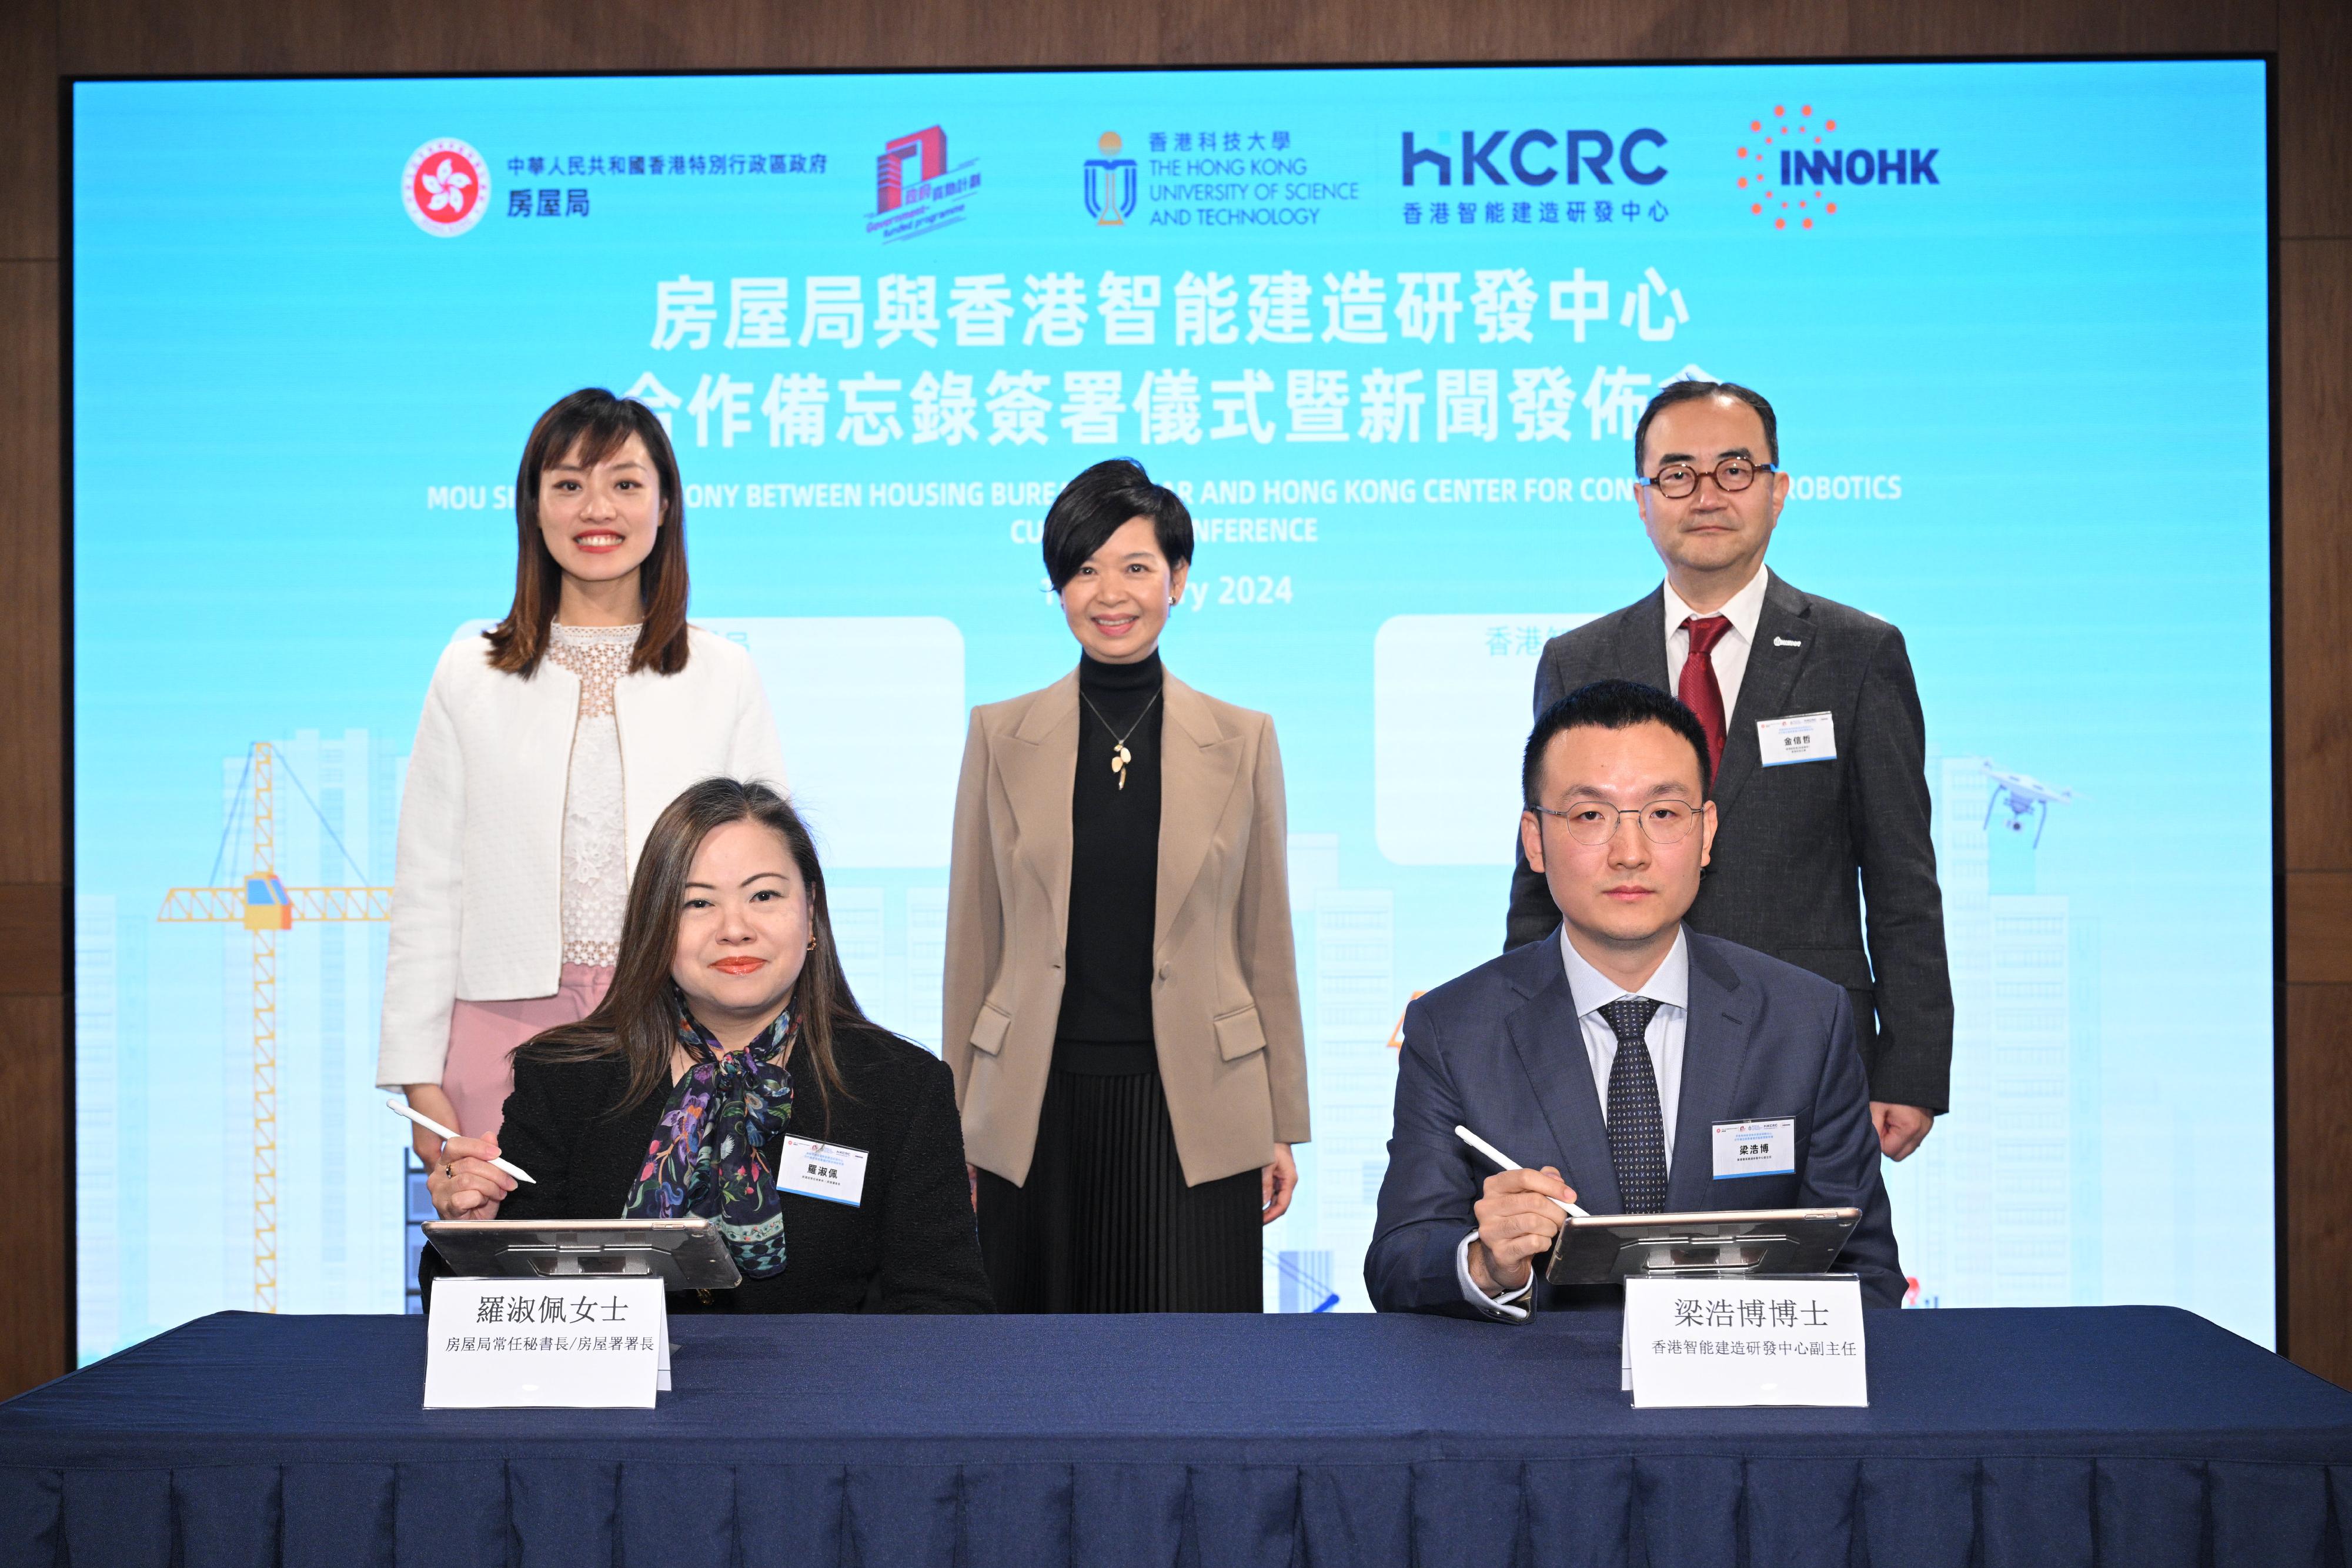 The Housing Bureau signed a Memorandum of Understanding (MOU) with the Hong Kong Center for Construction Robotics (HKCRC) today (January 16) for the establishment of a strategic partnership, with a view to jointly foster the upgrading and transformation of the construction industry, and provide solutions to address challenges including large-scale housing production, the shortage of the construction labour force, continuous enhancement of site safety, etc. Witnessed by the Secretary for Housing, Ms Winnie Ho (back row, centre); the Acting Secretary for Innovation, Technology and Industry, Ms Lillian Cheong (back row, left); and the Chairman of the Board of the HKCRC, Dr Kim Shin-cheul (back row, right), the Permanent Secretary for Housing/Director of Housing, Miss Rosanna Law (front row, left), signed the MOU with the Associate Director of the HKCRC, Dr Liang Haobo (front row, right).